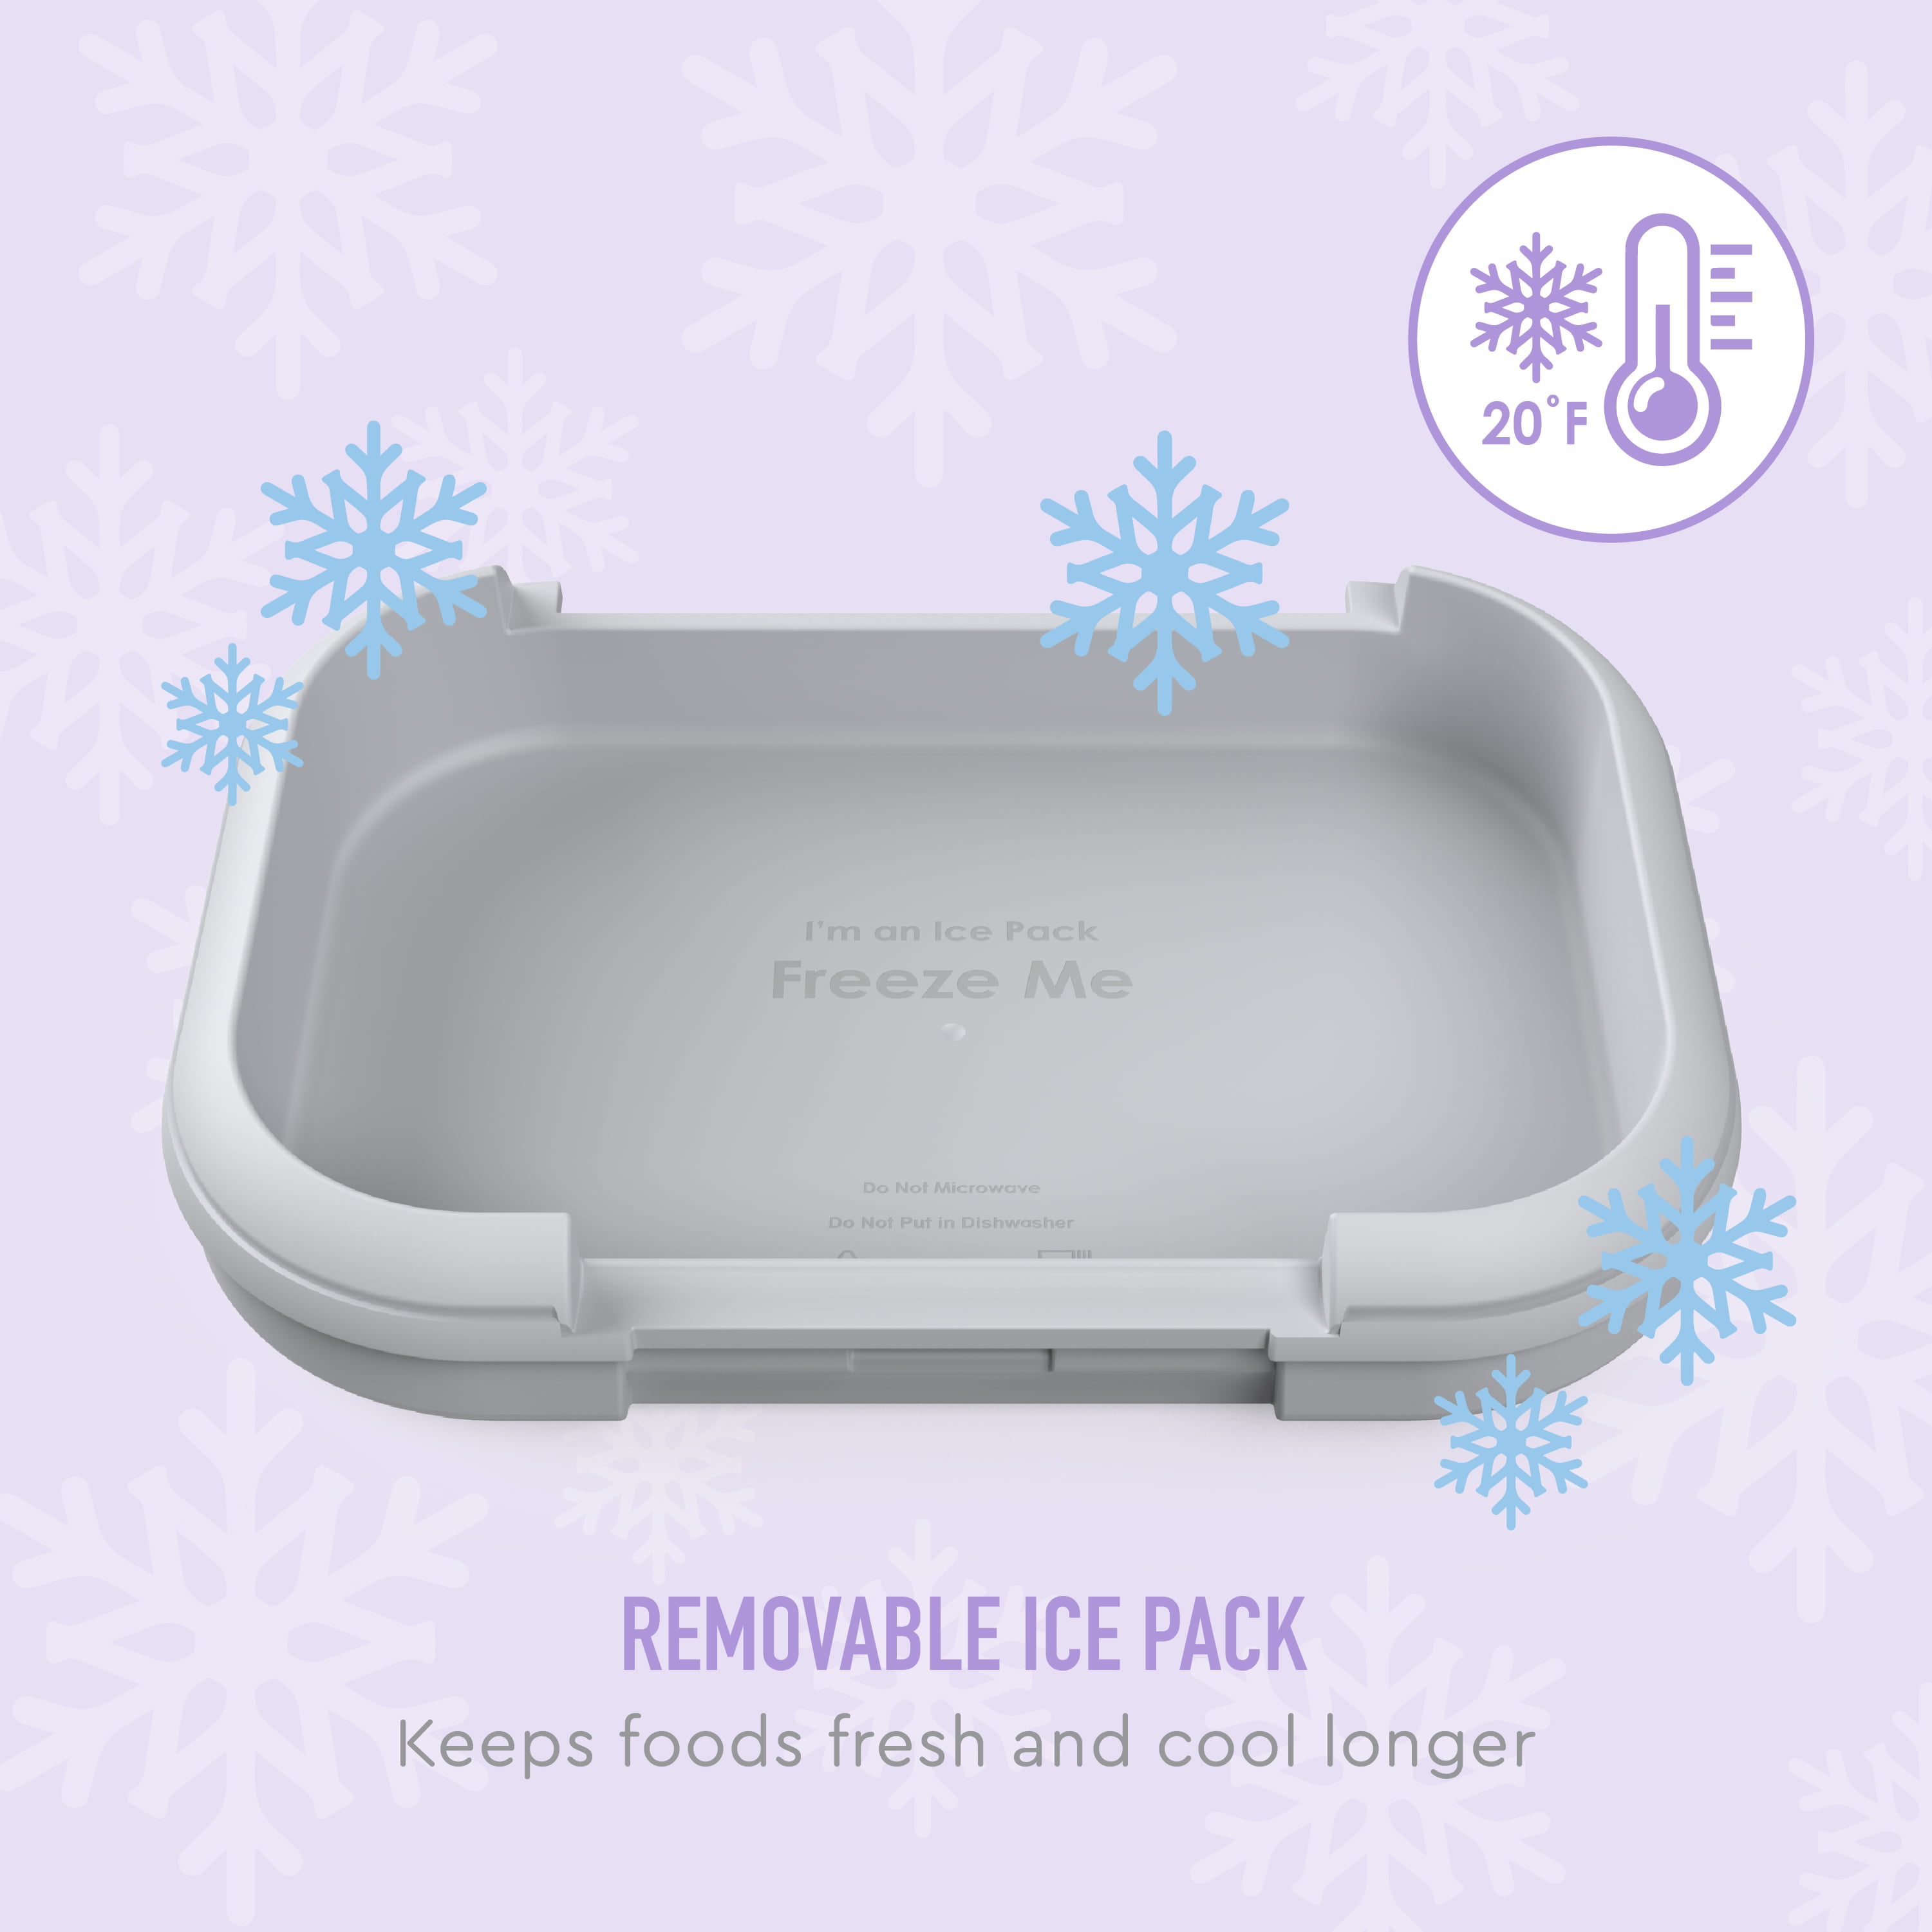 Bentgo Kids Chill Lunch Box - Confetti Designed Leak-Proof Bento & Removable Ice Pack 4 Compartments, Microwave Dishwasher Safe, Patented, 2-Year